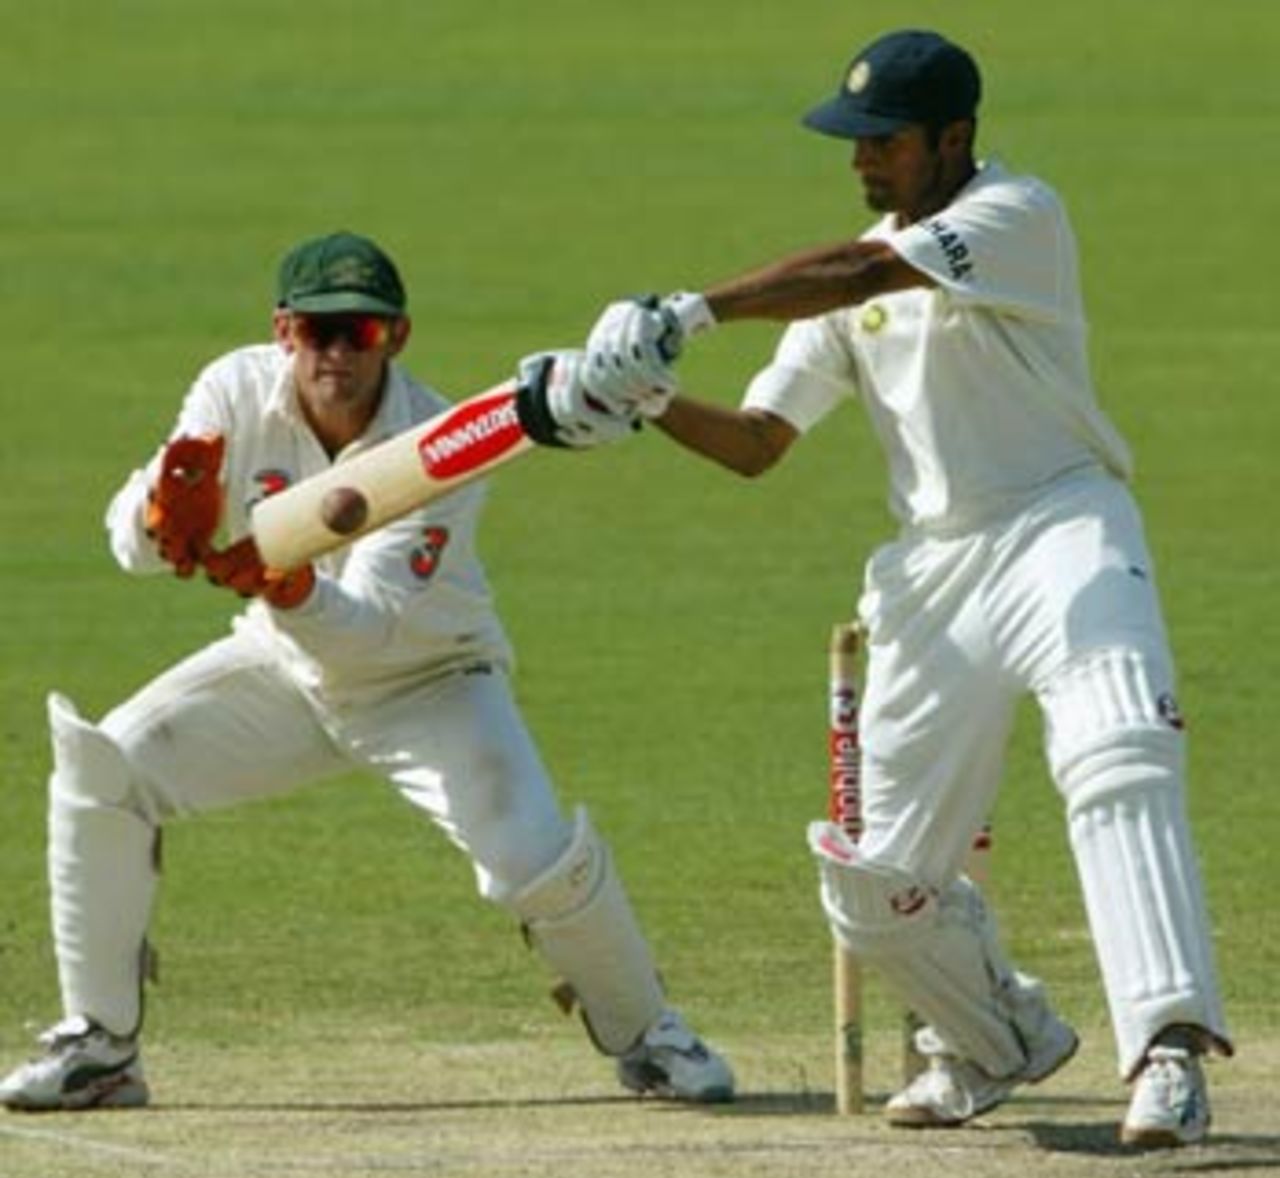 Dravid dealt with everything that was thrown at him, and hit the winning runs, Australia v India, 2nd Test, Adelaide, 5th day, December 16, 2003